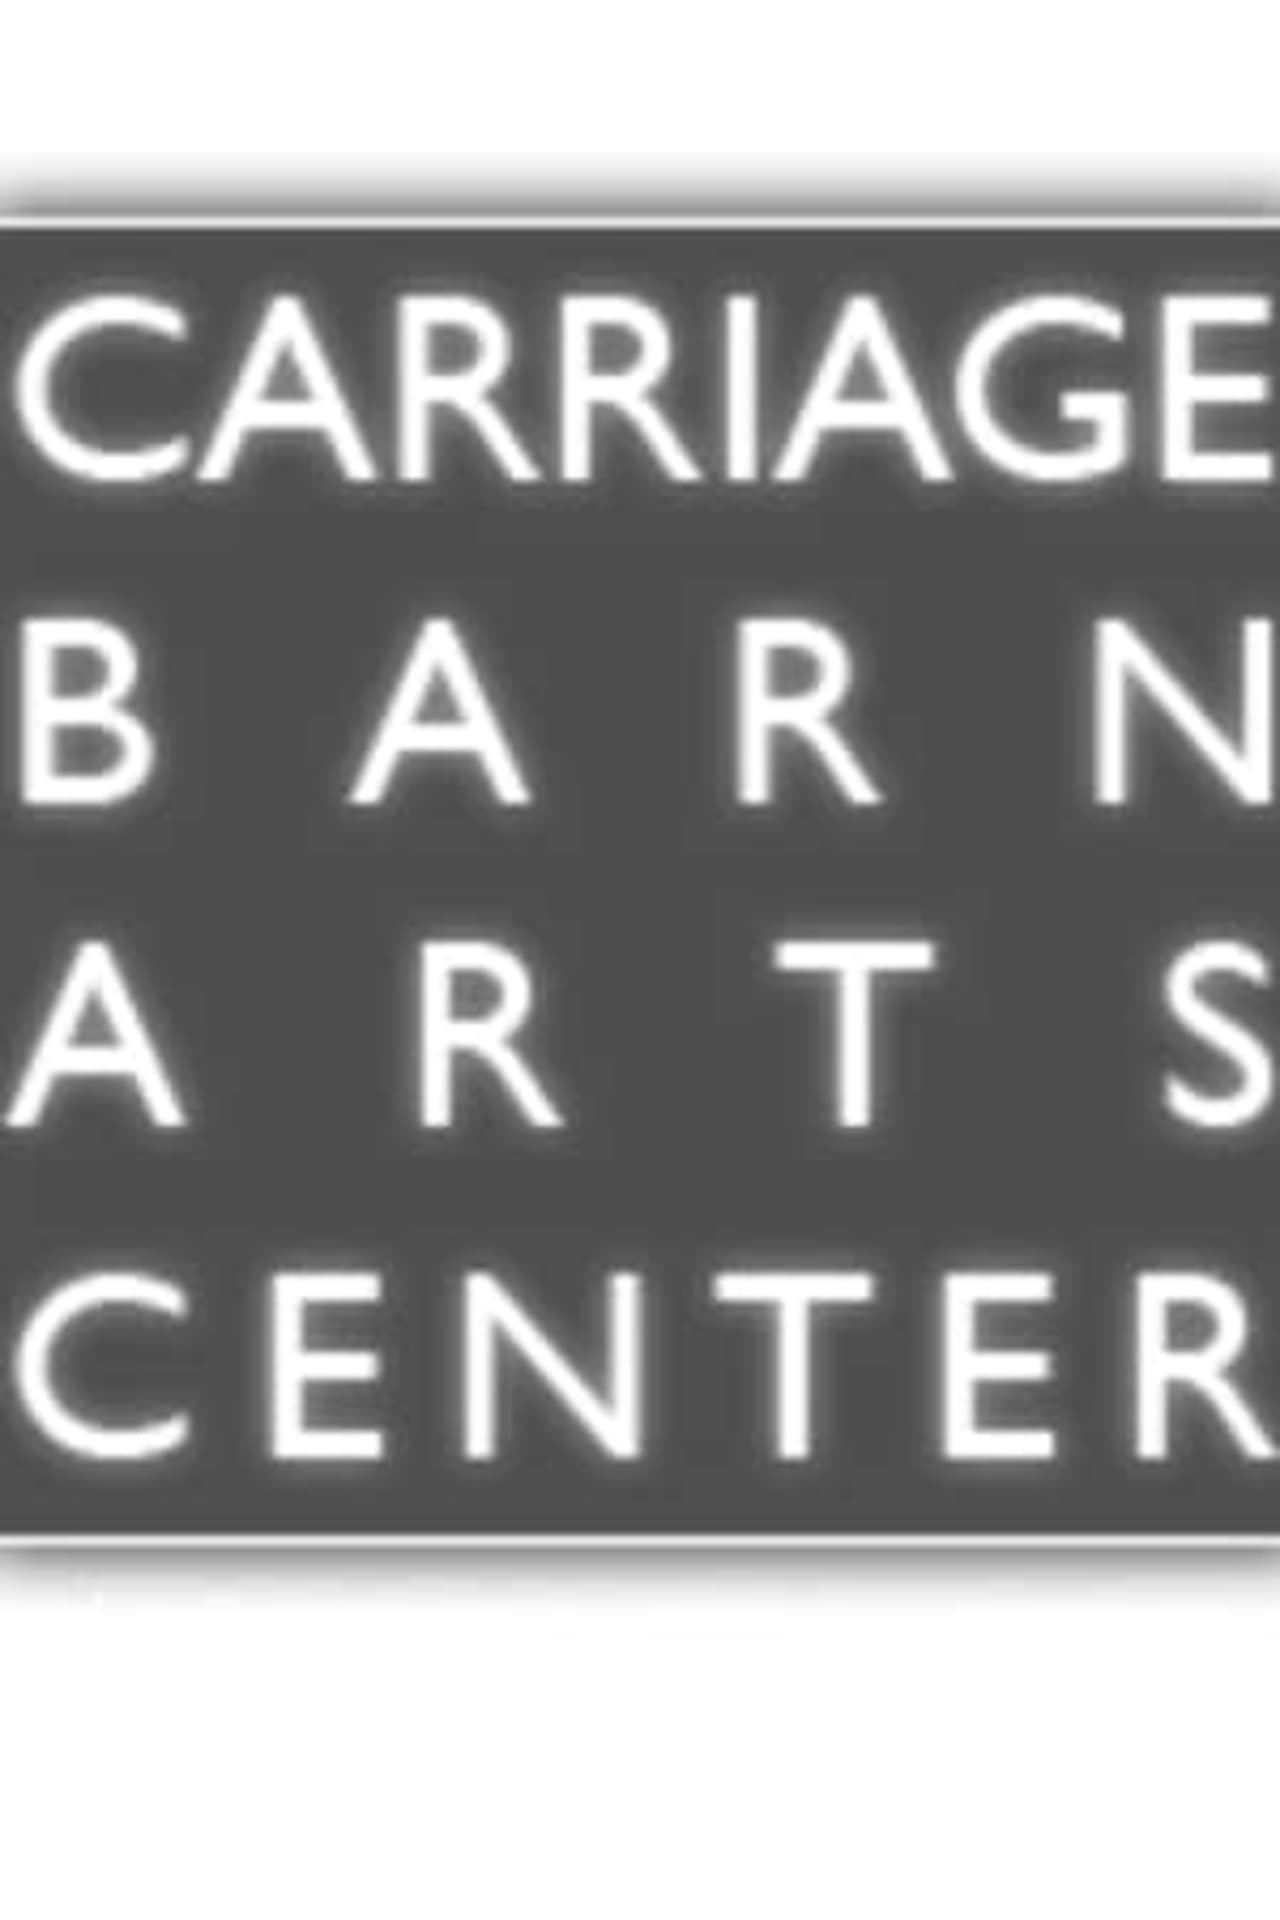 The Carriage Barn Arts Center in New Canaan is hosting two major art events this fall. 